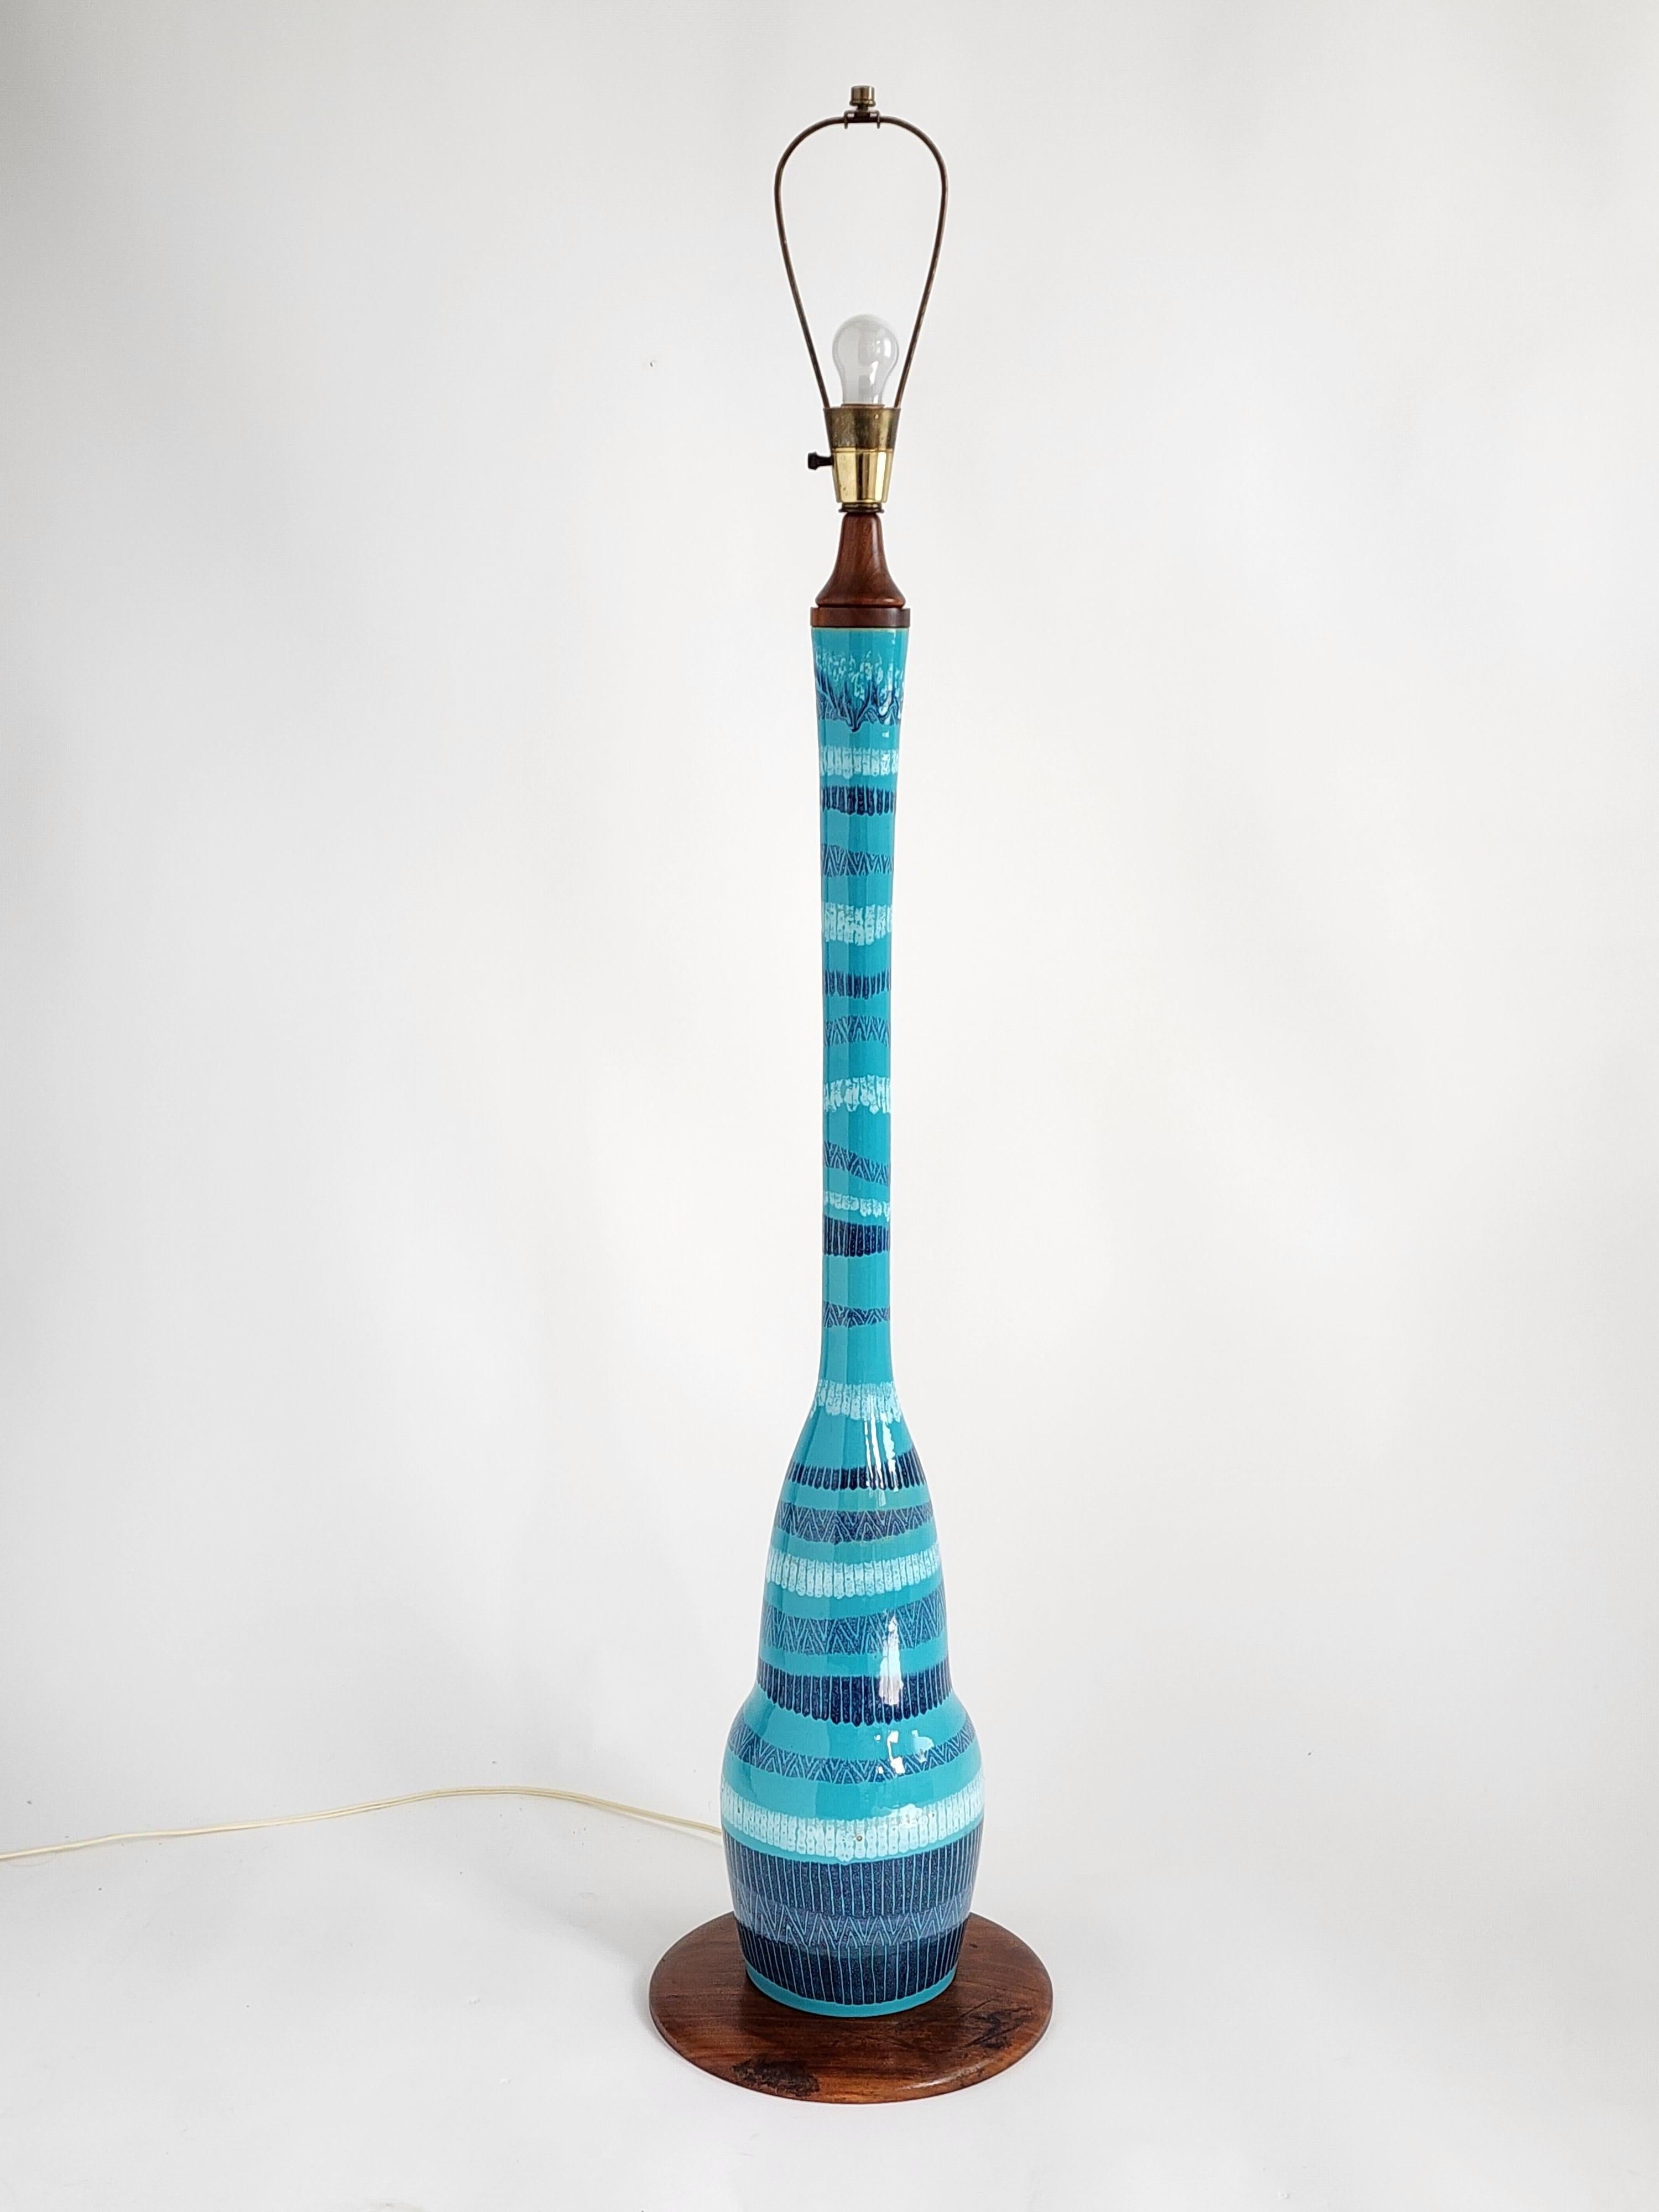 Huge glazed ceramic floor lamp in a tastefull blue tone variation sitting on a walnut base  

Prime quality material and hardware. 

Lamp mesure 55 in. to top arch 47 in. to socket. 

Walnut base is 12 in. wide. 

Ceramic base is 8 in. at